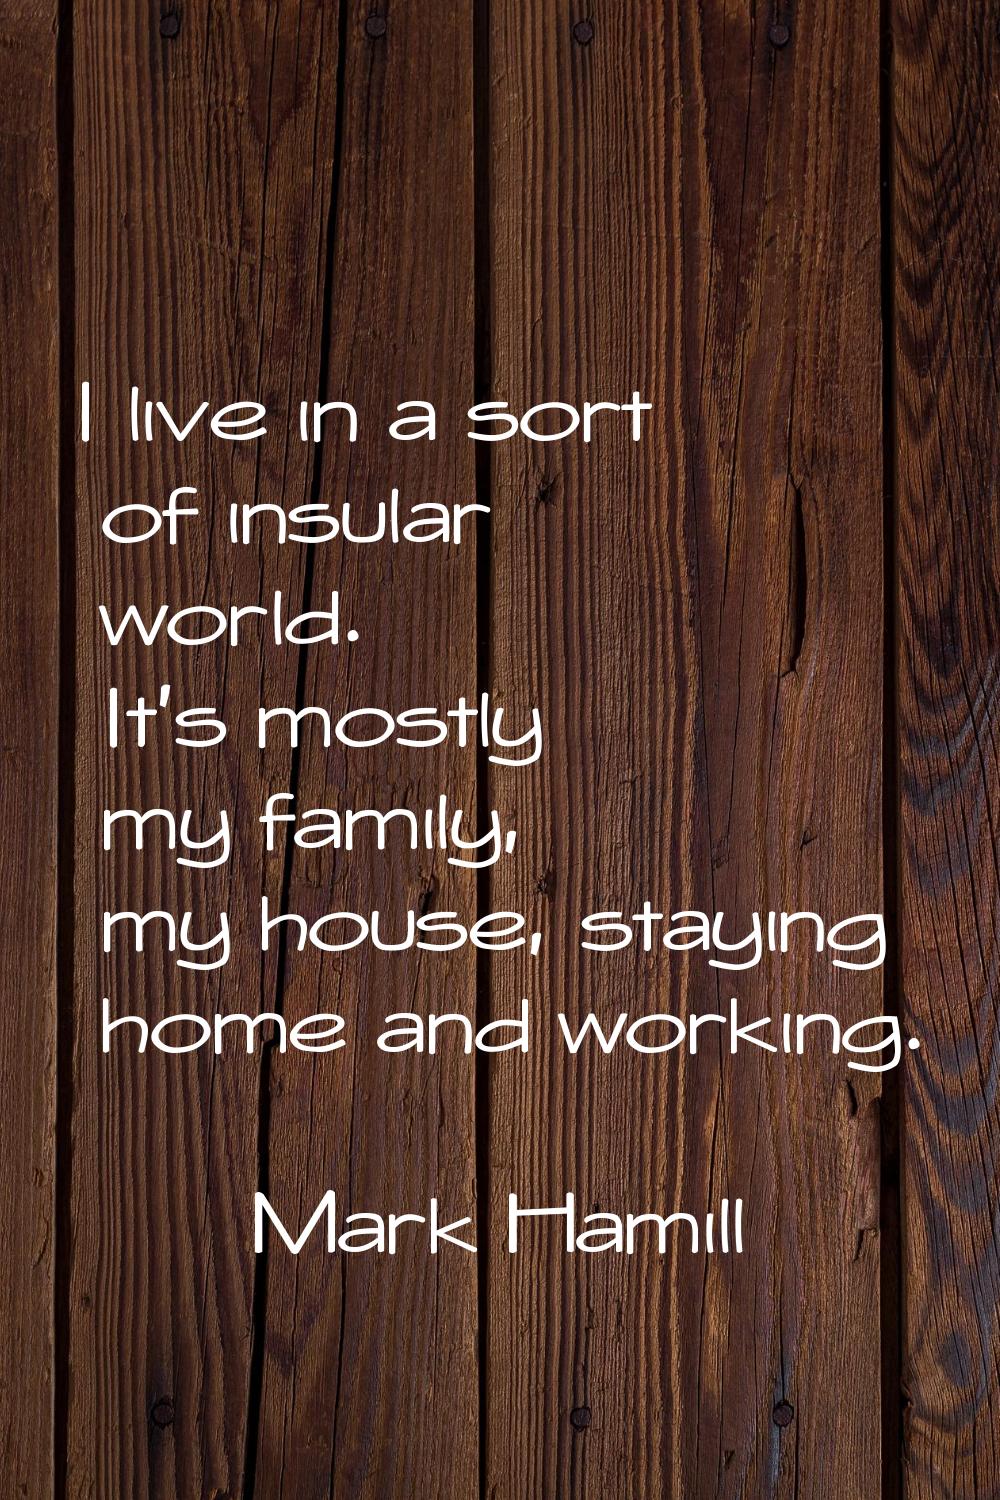 I live in a sort of insular world. It's mostly my family, my house, staying home and working.